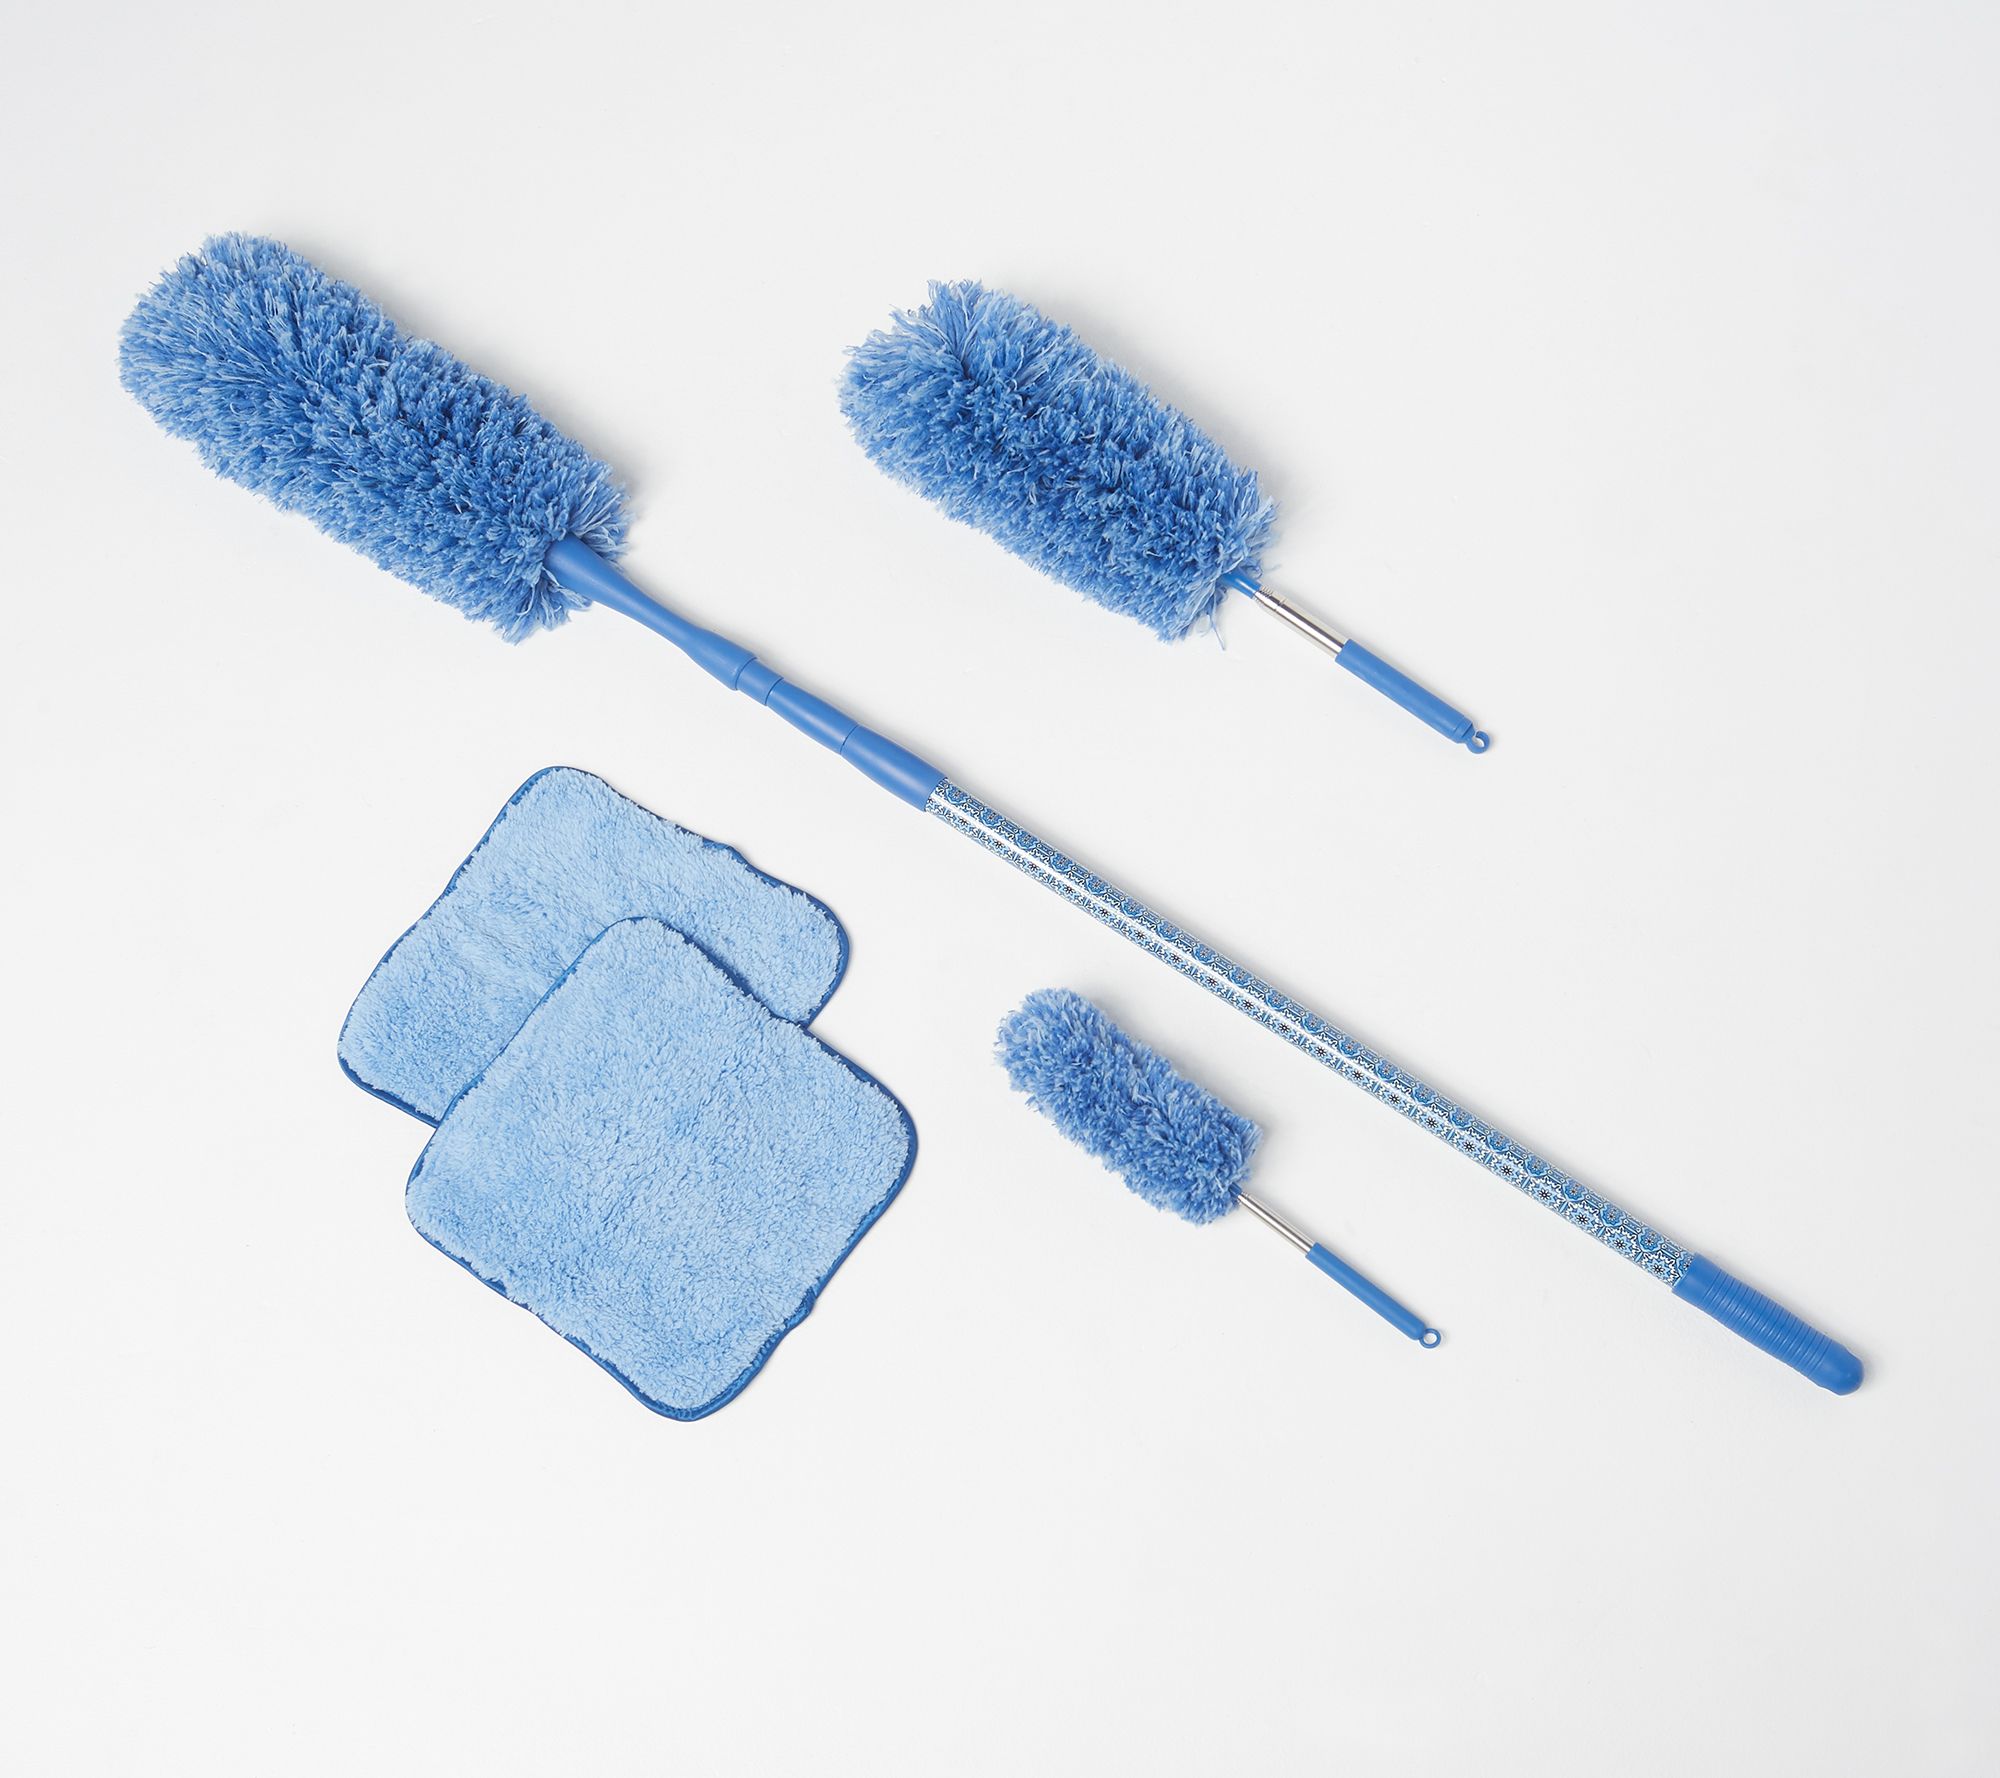 6 Piece Easy Reach Microfiber Duster Set By Campanelli